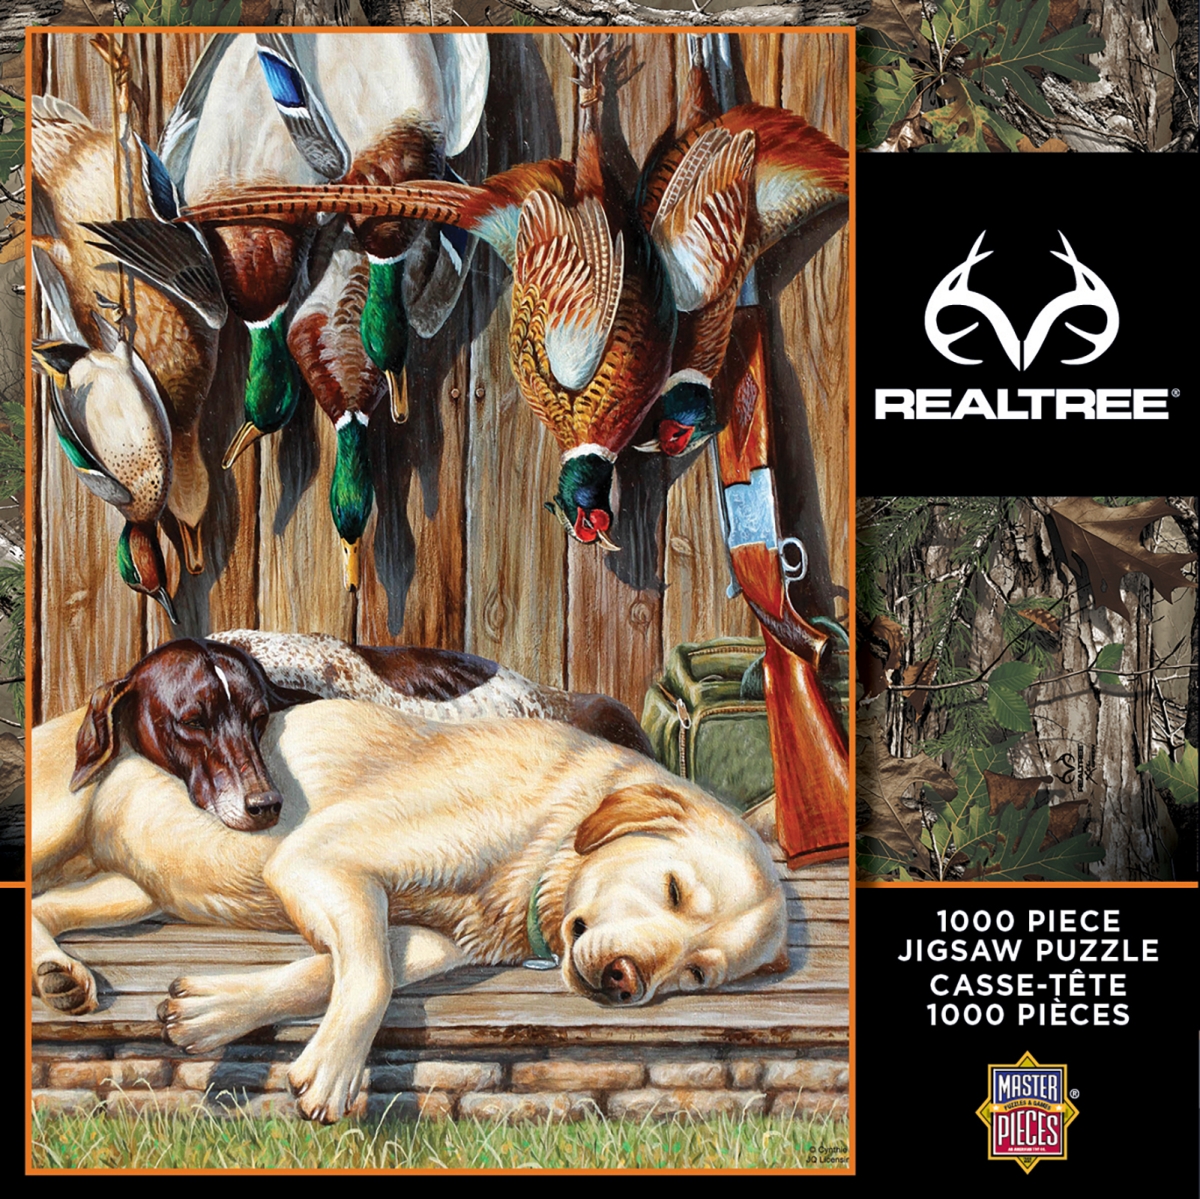 71941 19.25 X 26.75 In. Realtree All Tuckered Out Jigsaw Puzzle - 1000 Piece